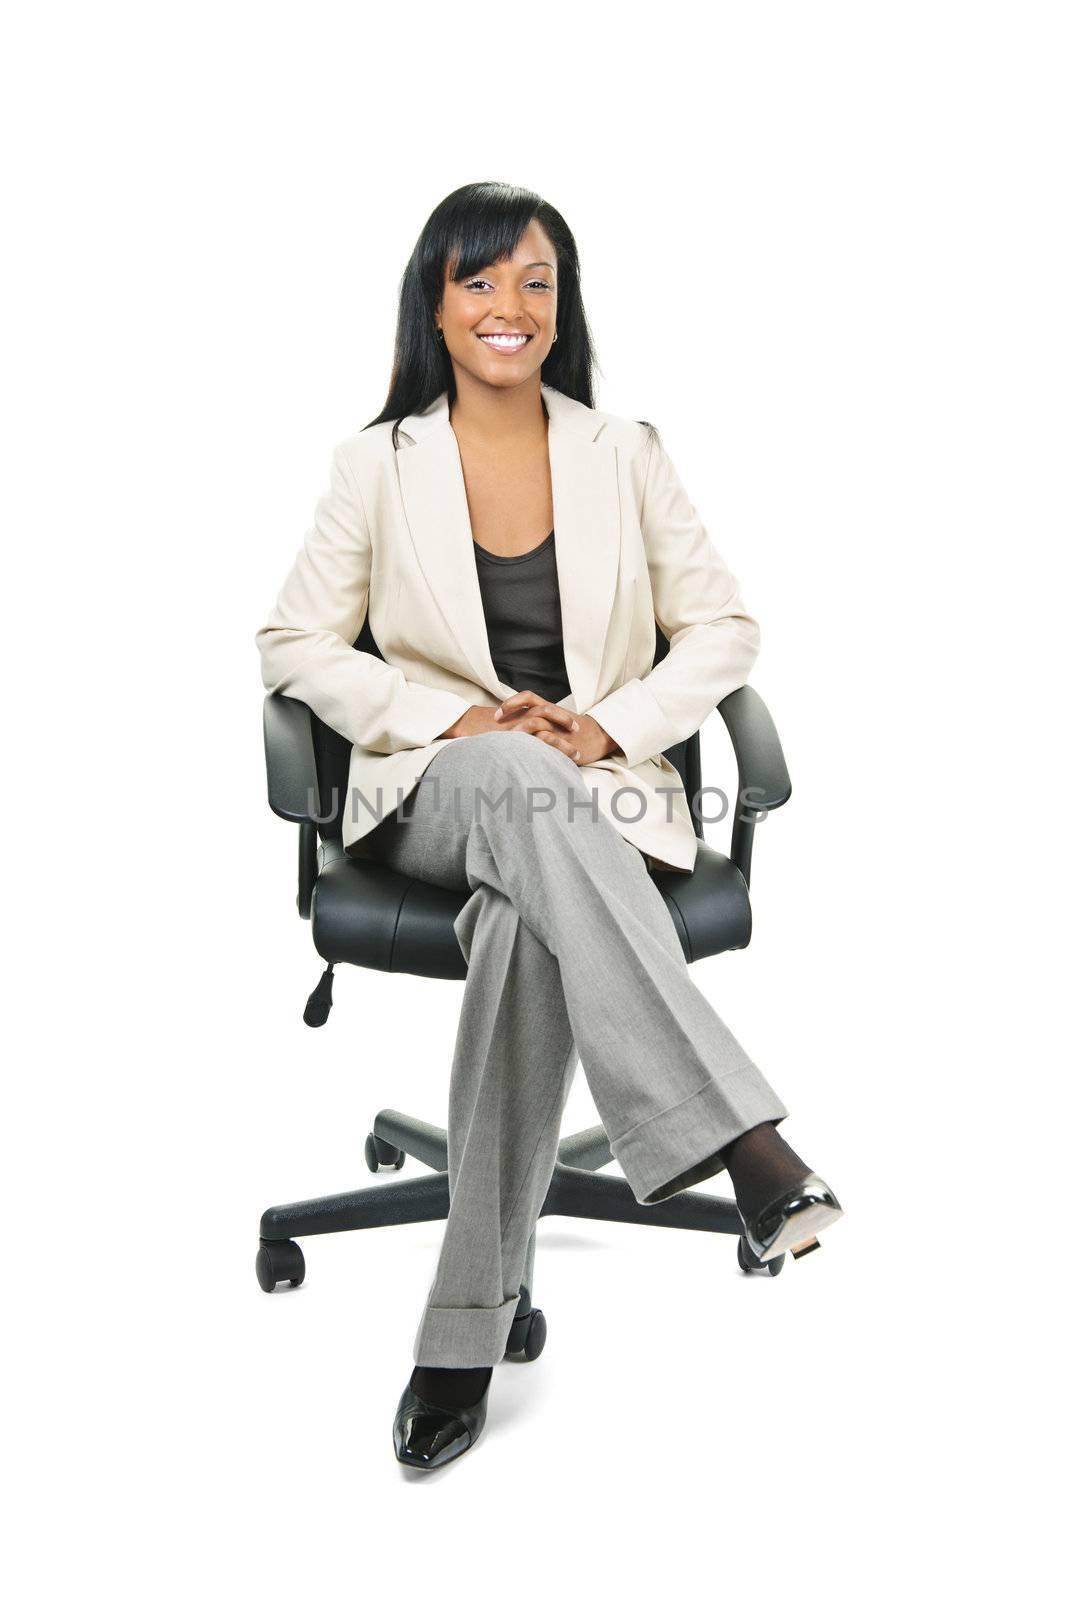 Young smiling black woman business manager sitting in leather office chair